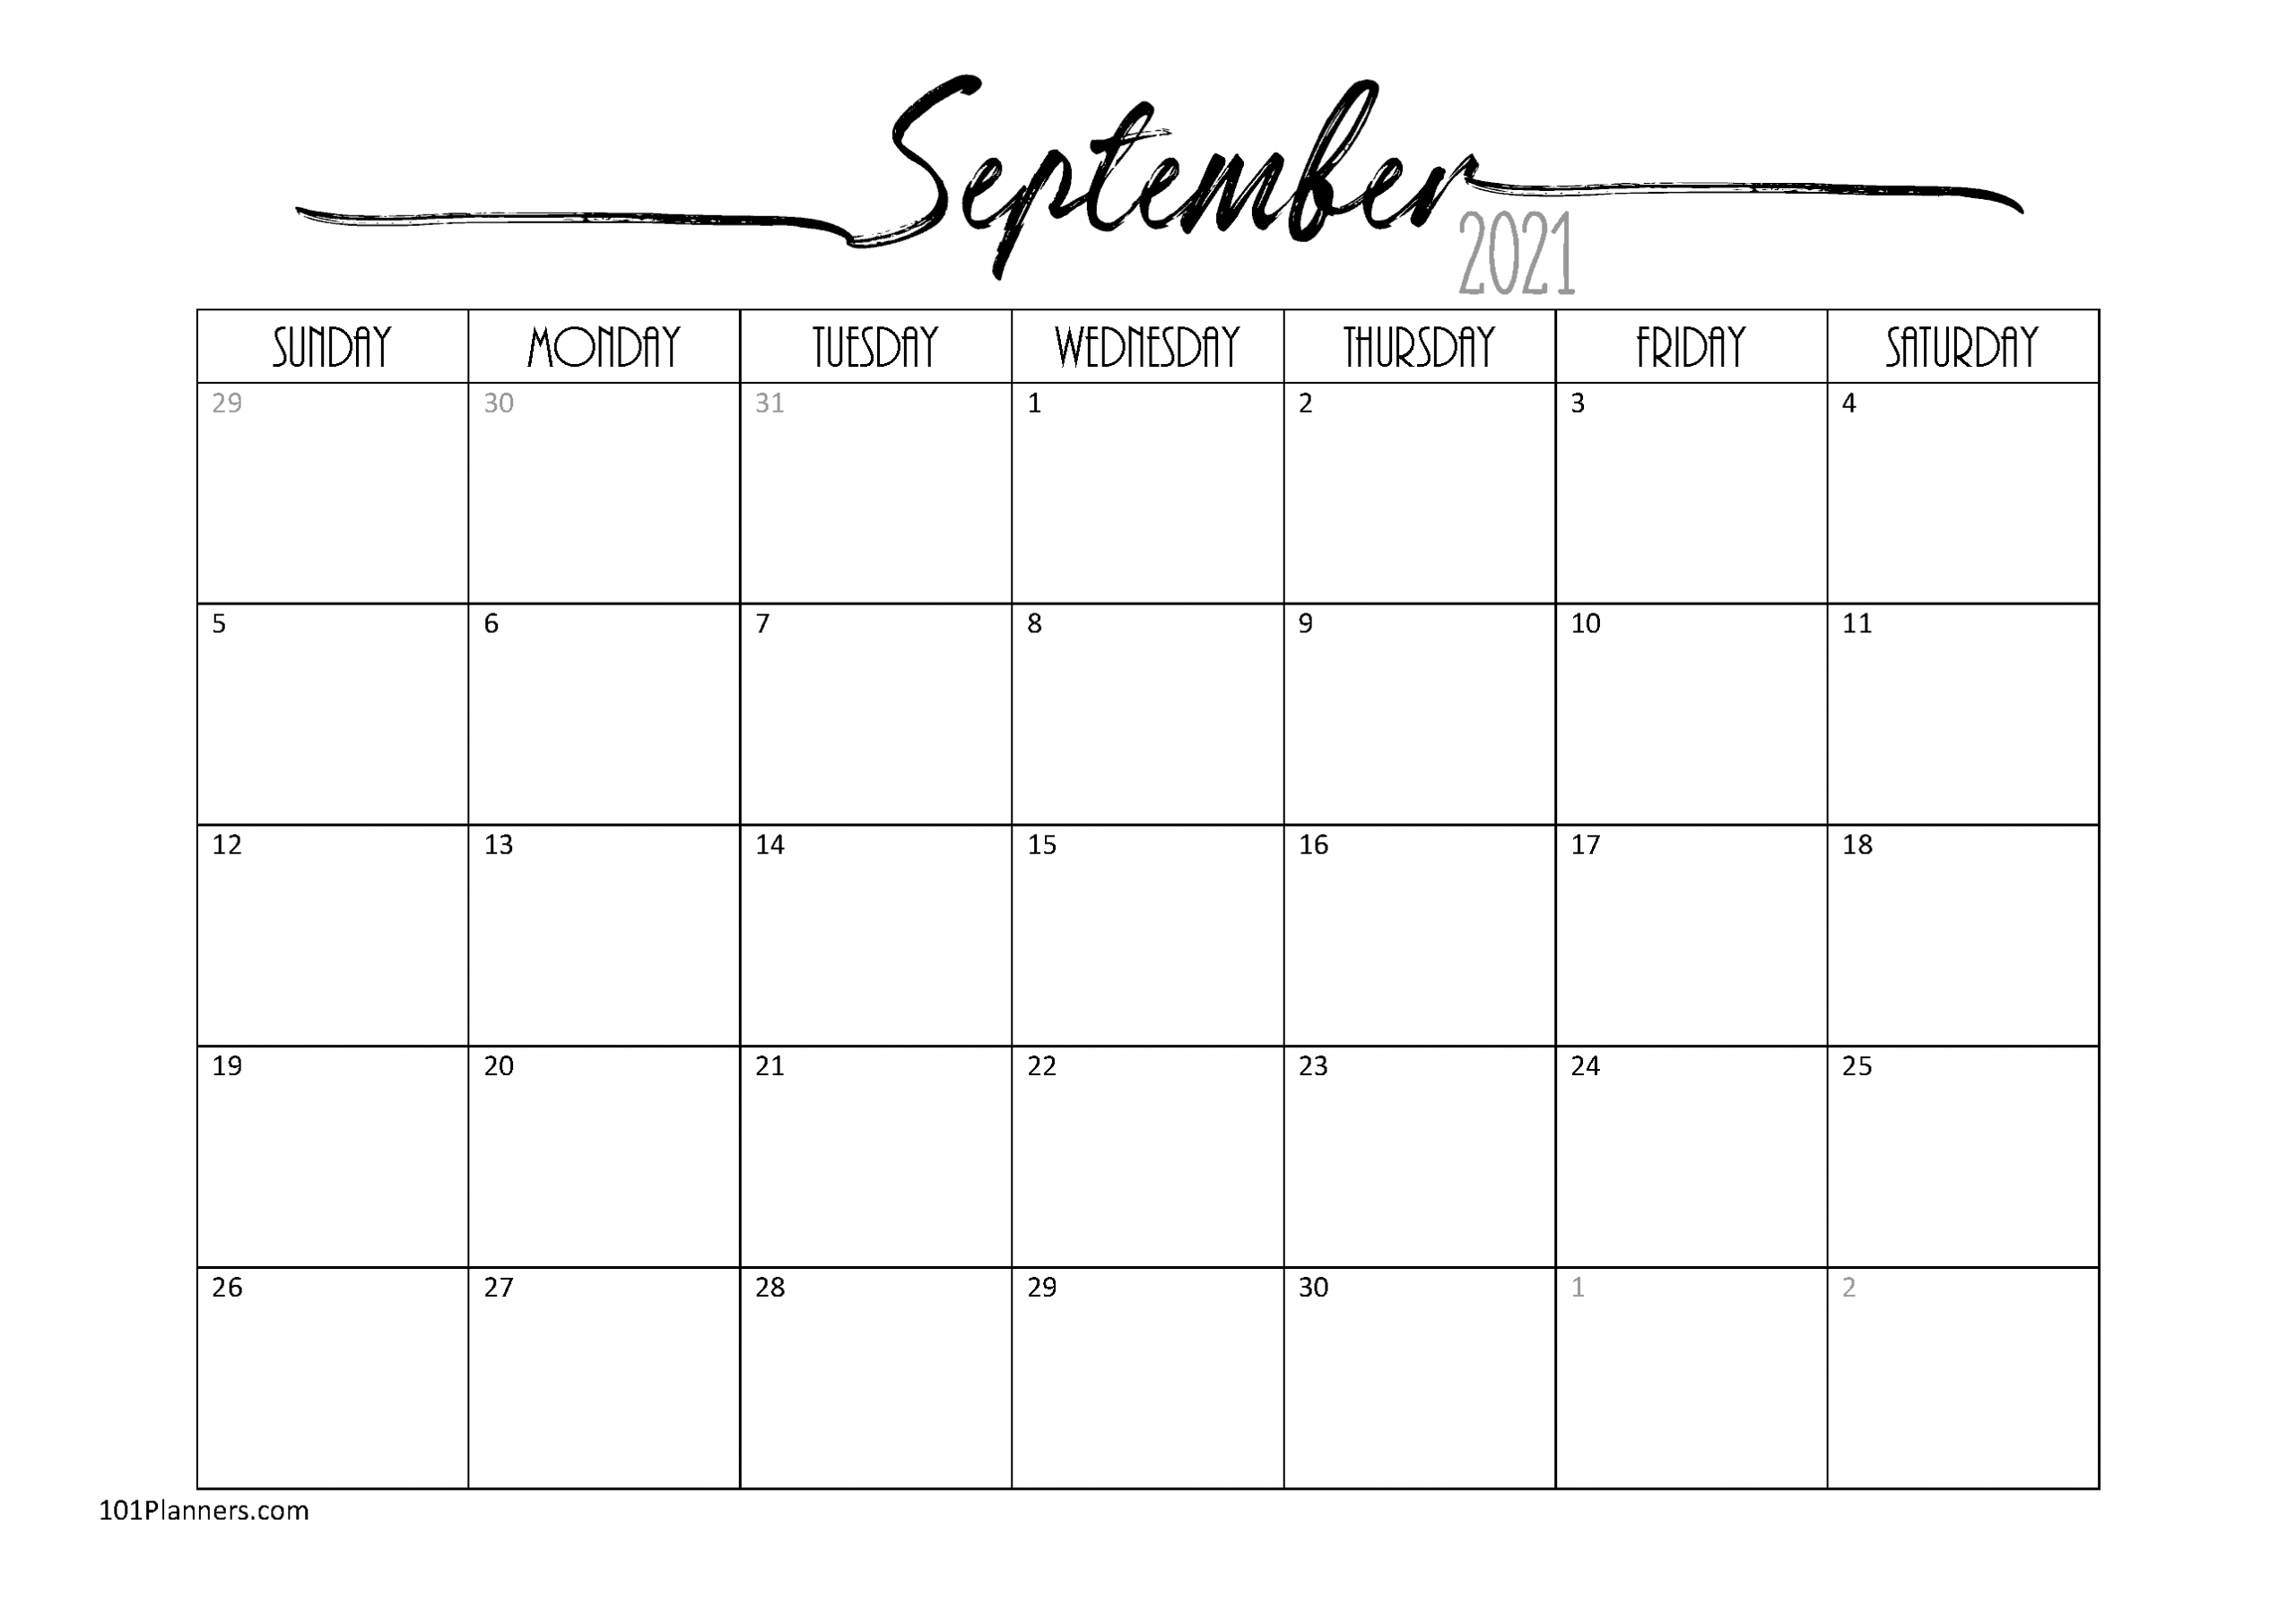 Free Editable 2021 Calendars In Word / Printable Calendar Free Monthly Calendars That Can Be Edited